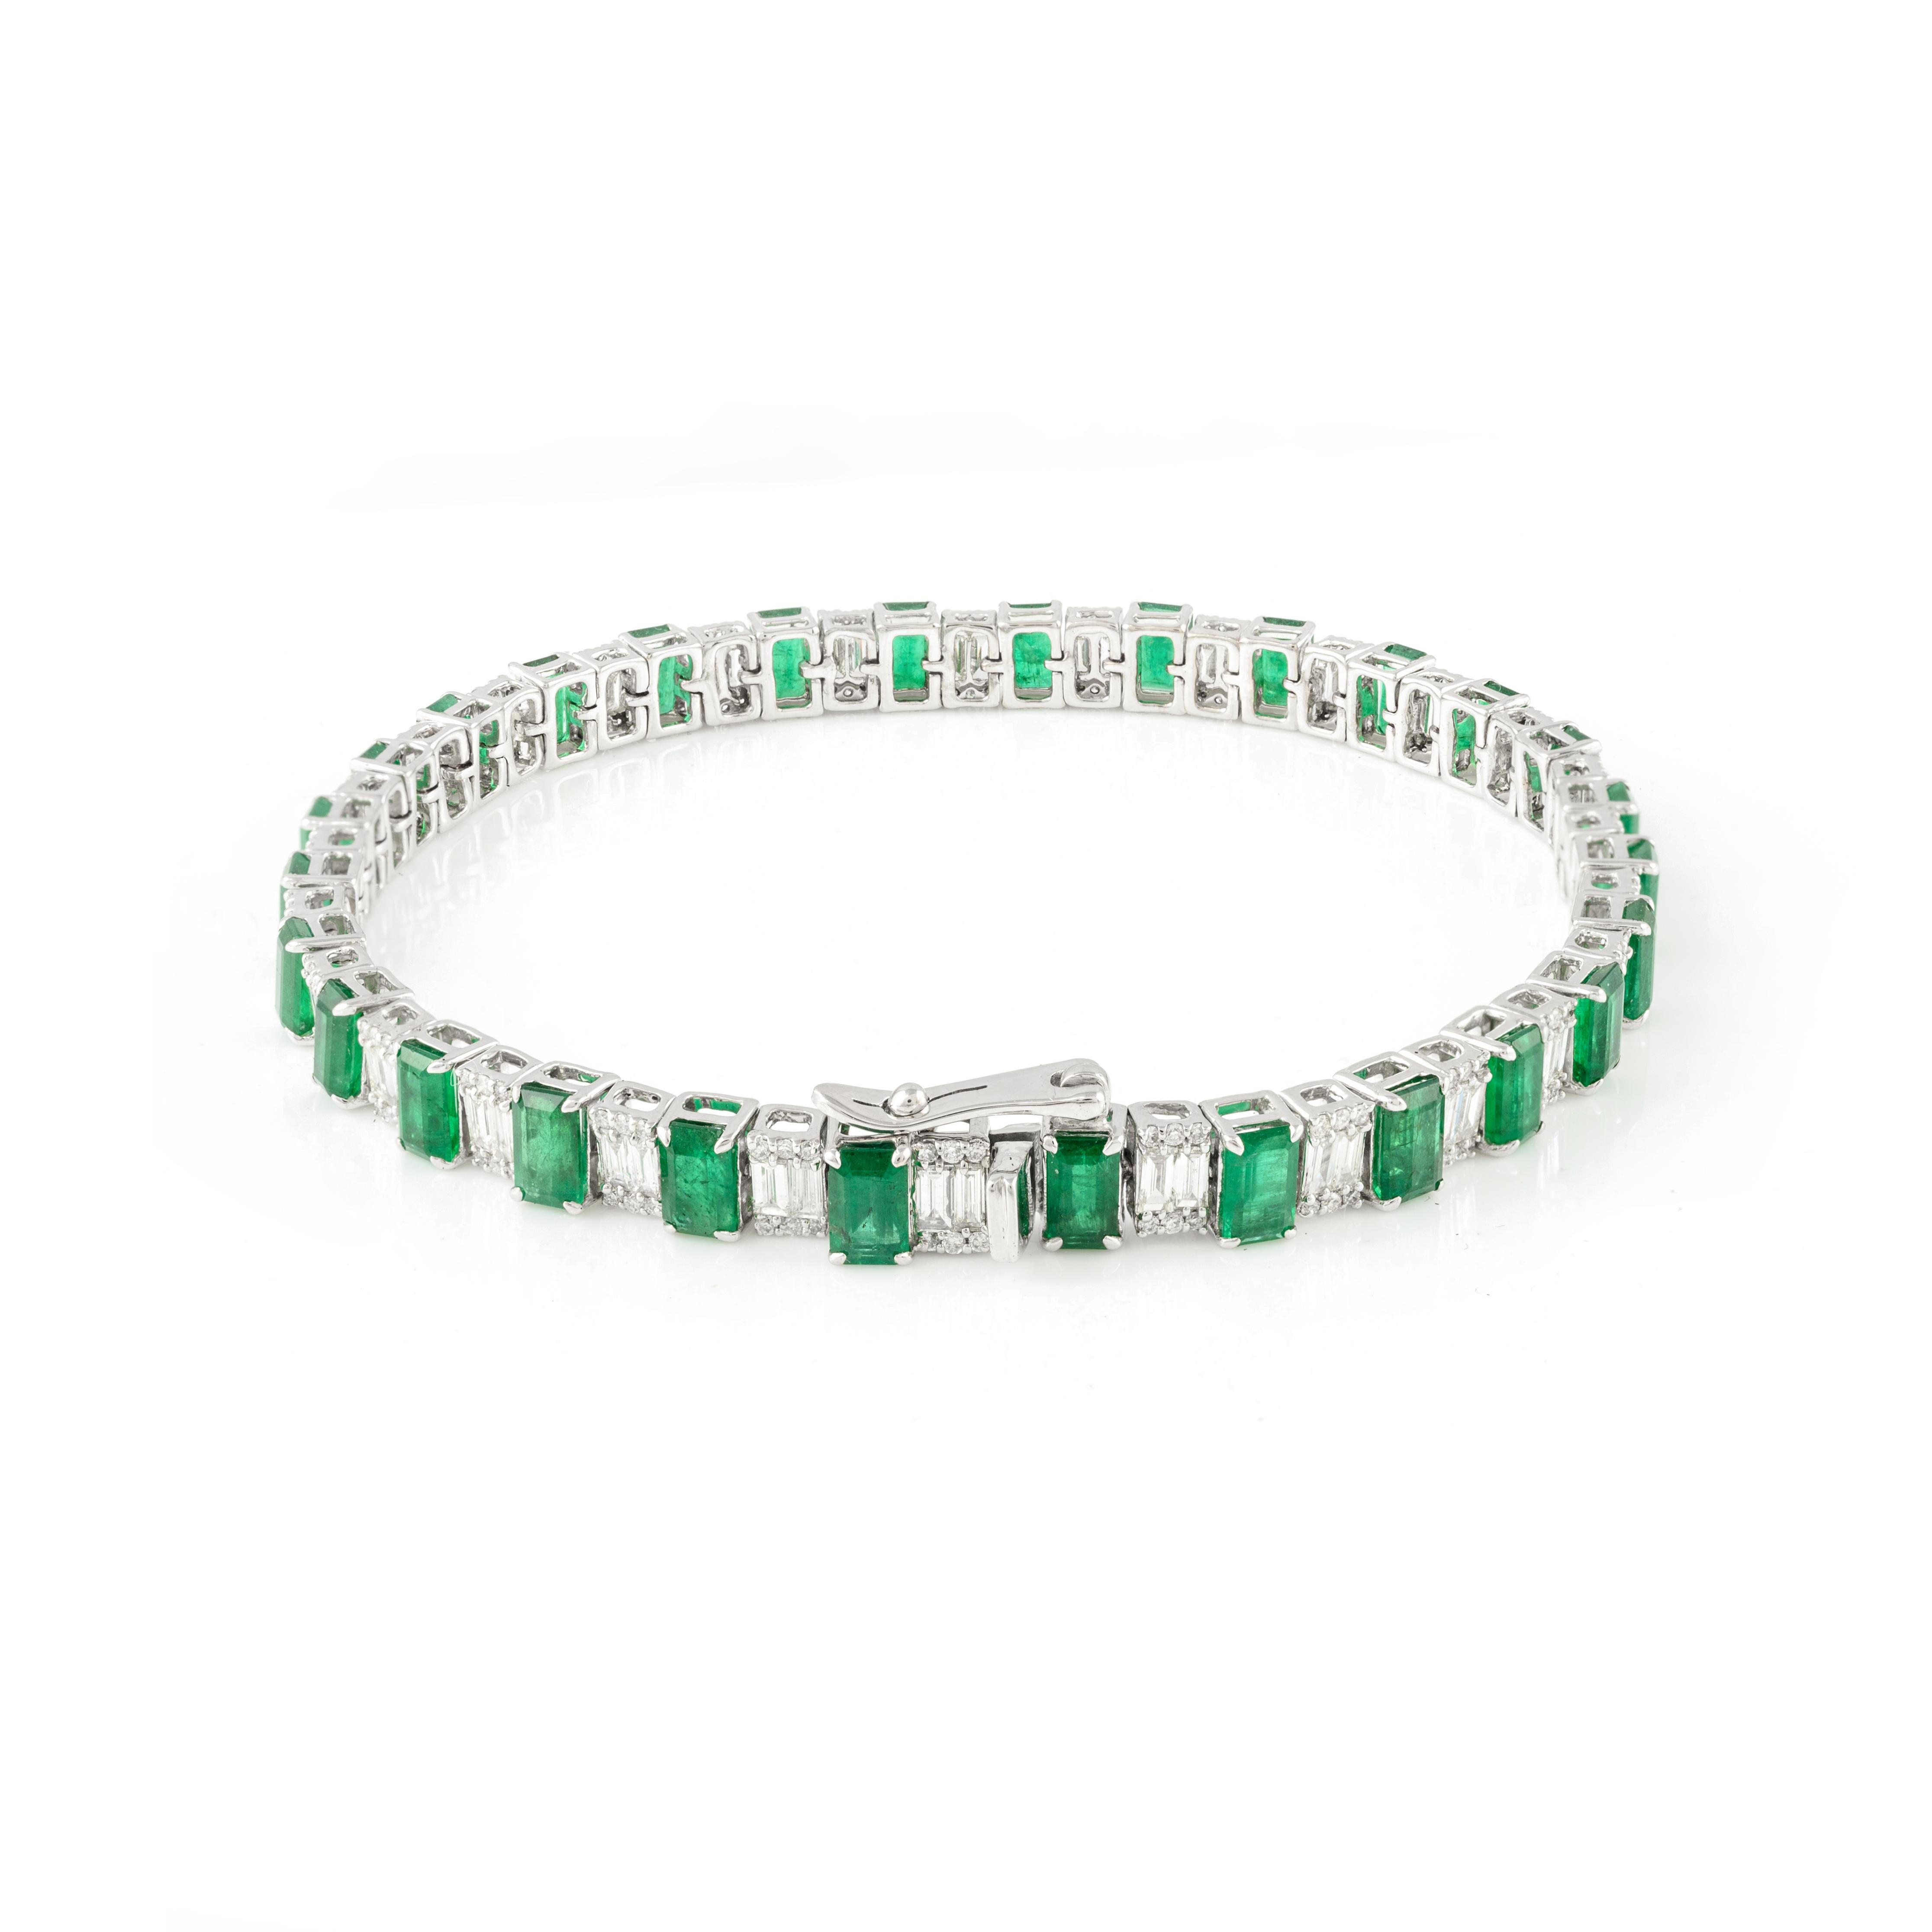 Octagon Cut 7.86 ct Emerald Tennis Bracelet 18k Solid White Gold, Christmas Gift For Grandma For Sale